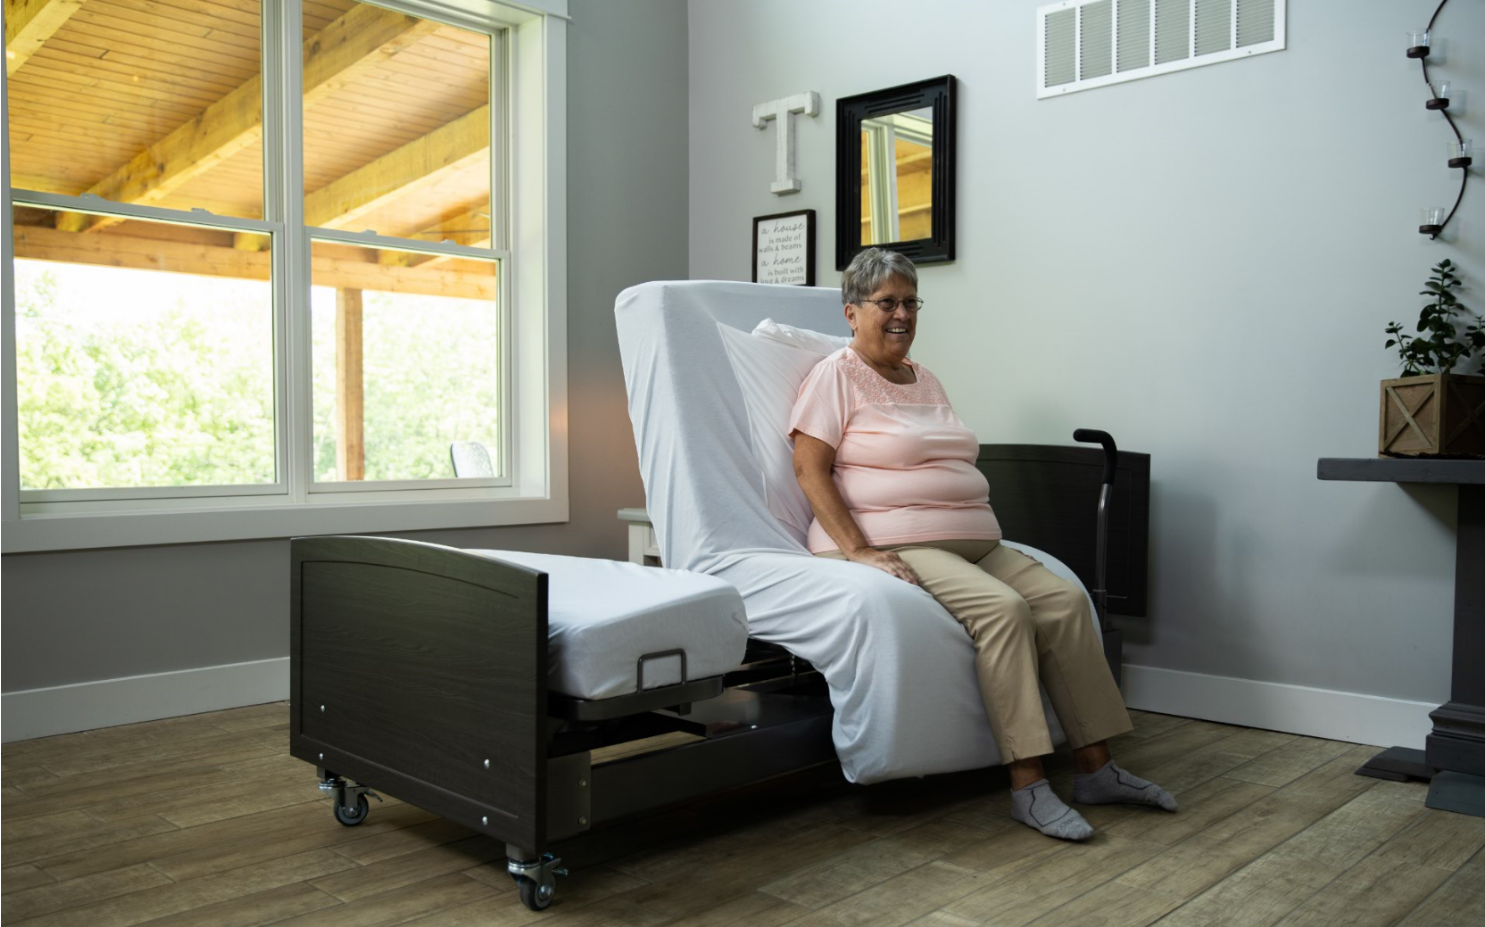 Image of a woman sitting on the ActiveCare Fixed Height Hospital Bed.